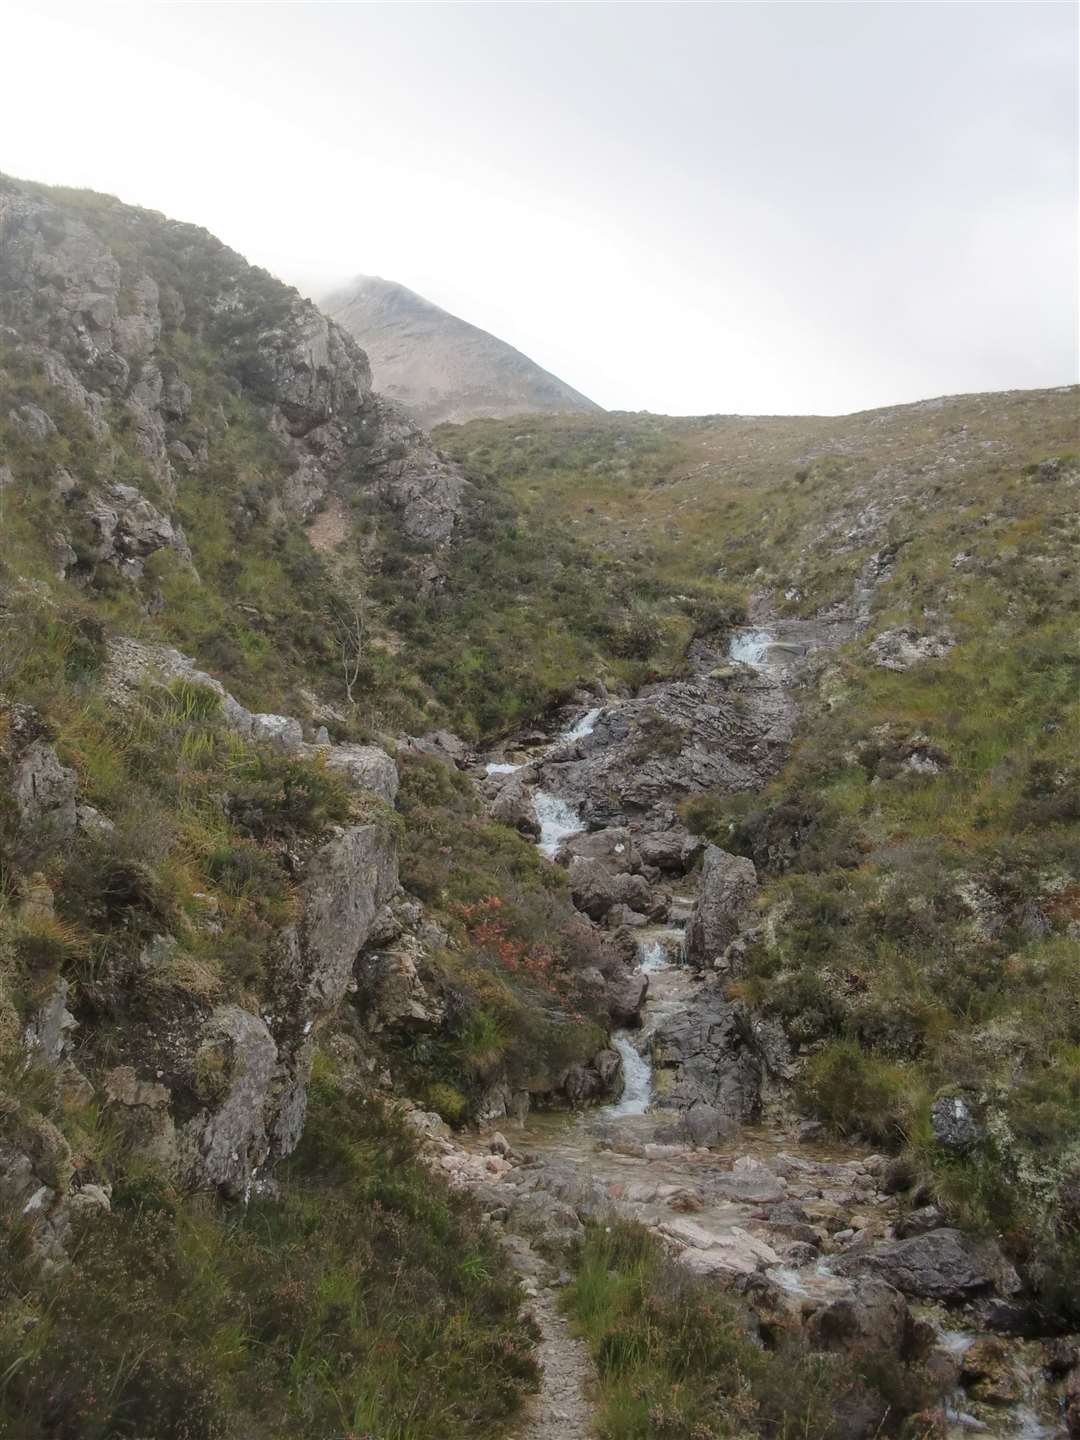 Three attractive burns, issuing from Creag Dubh, are crossed by the path on the way up.